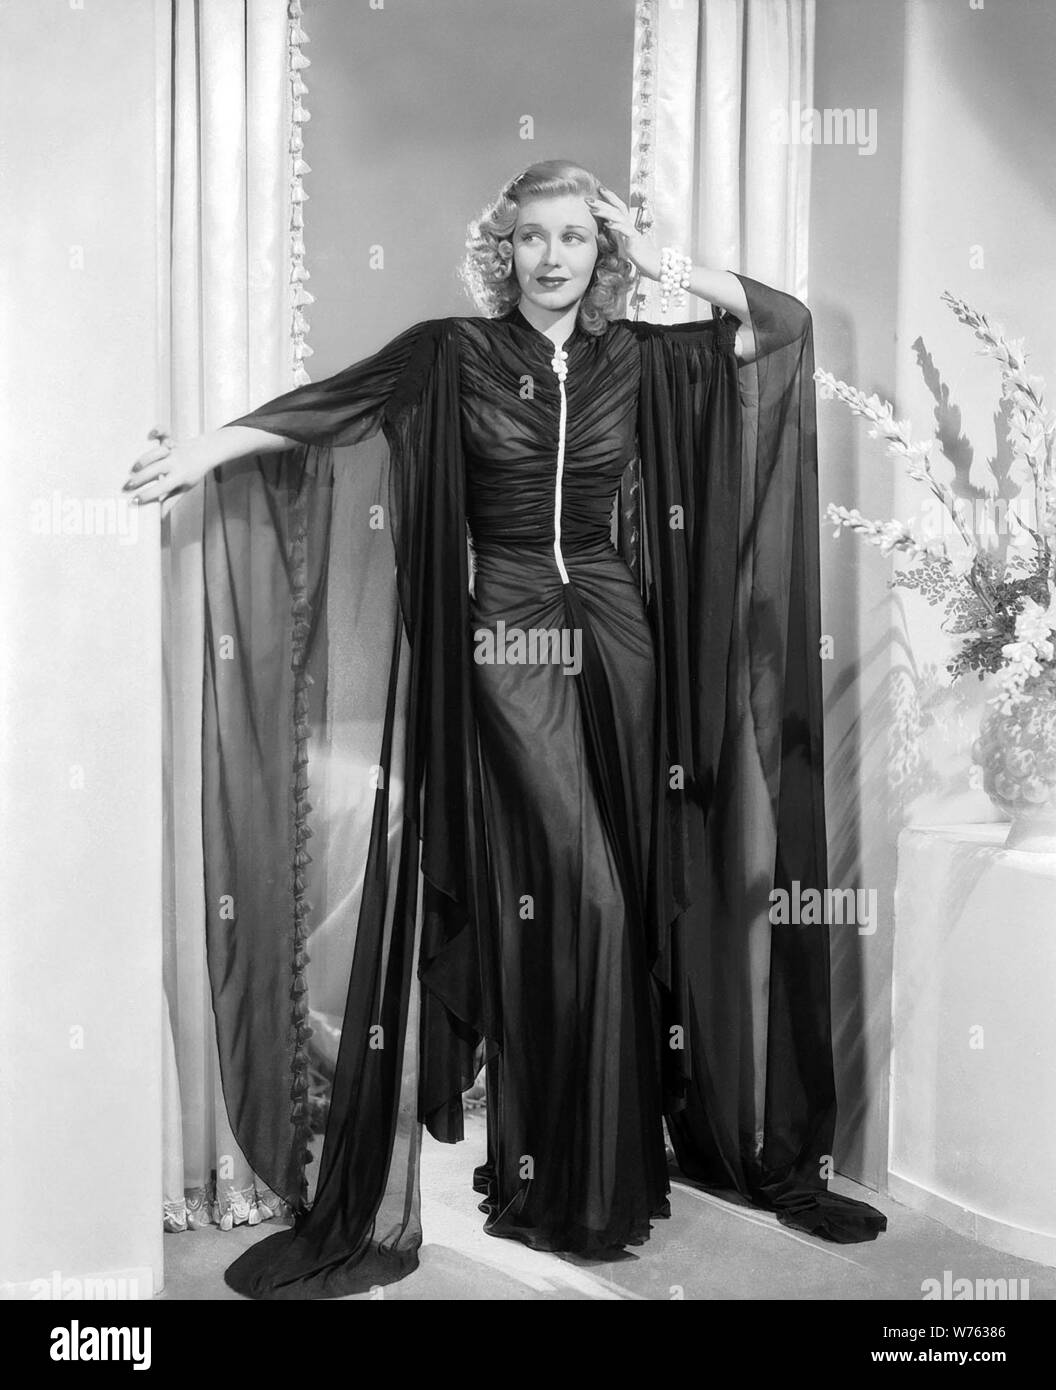 GINGER ROGERS in SHALL WE DANCE (1937), directed by MARK SANDRICH. Credit: RKO / Album Stock Photo